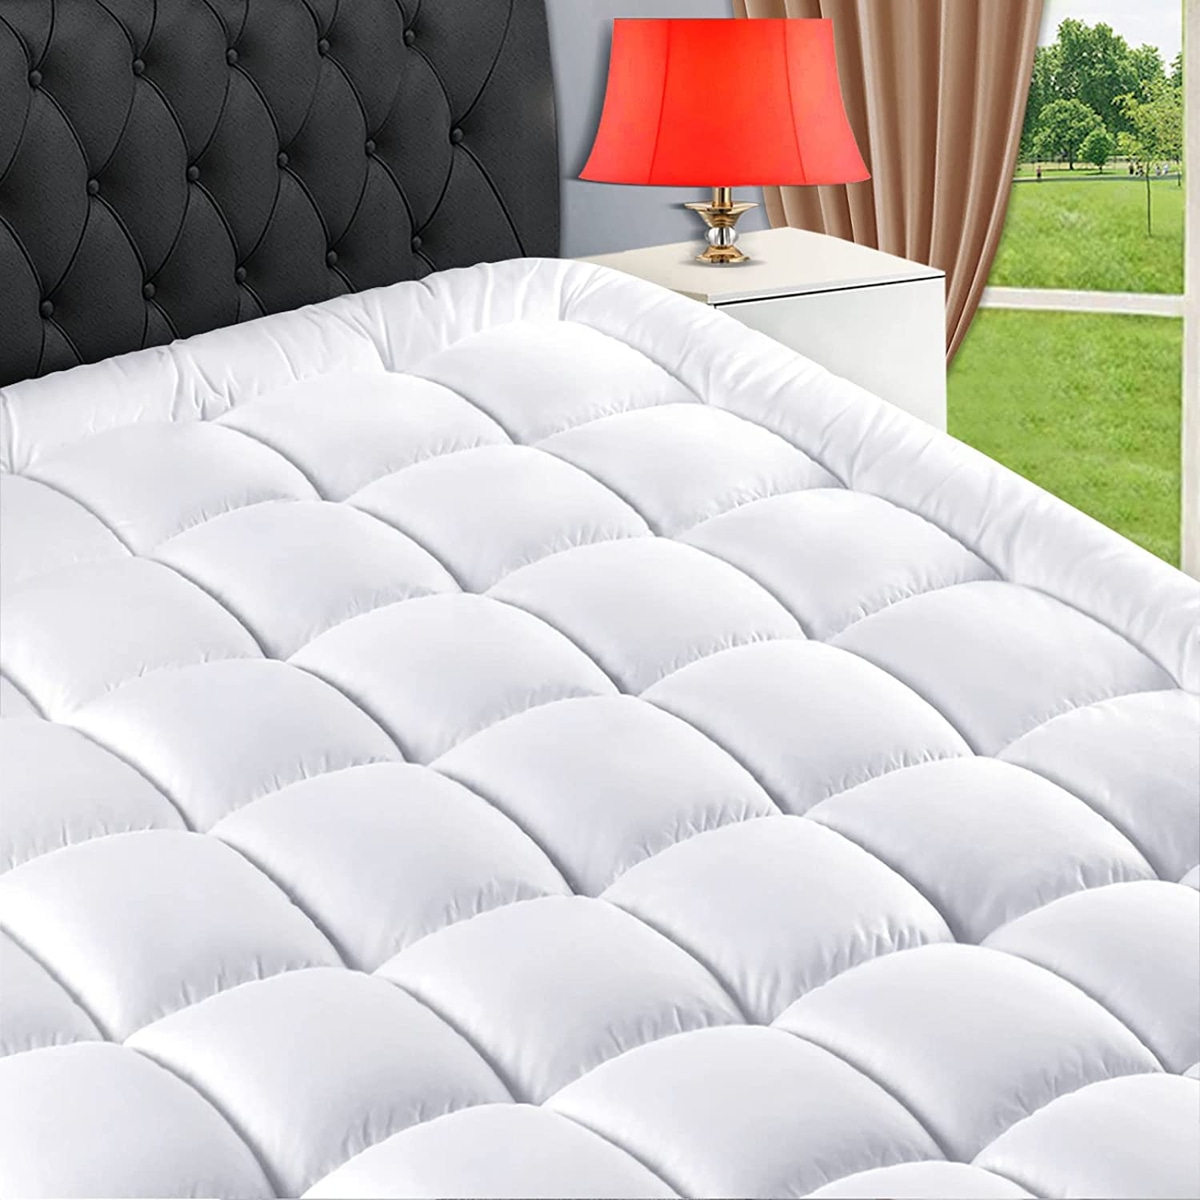 This $34 Cooling Mattress Pad Has Over 15,000 5-Star  Reviews